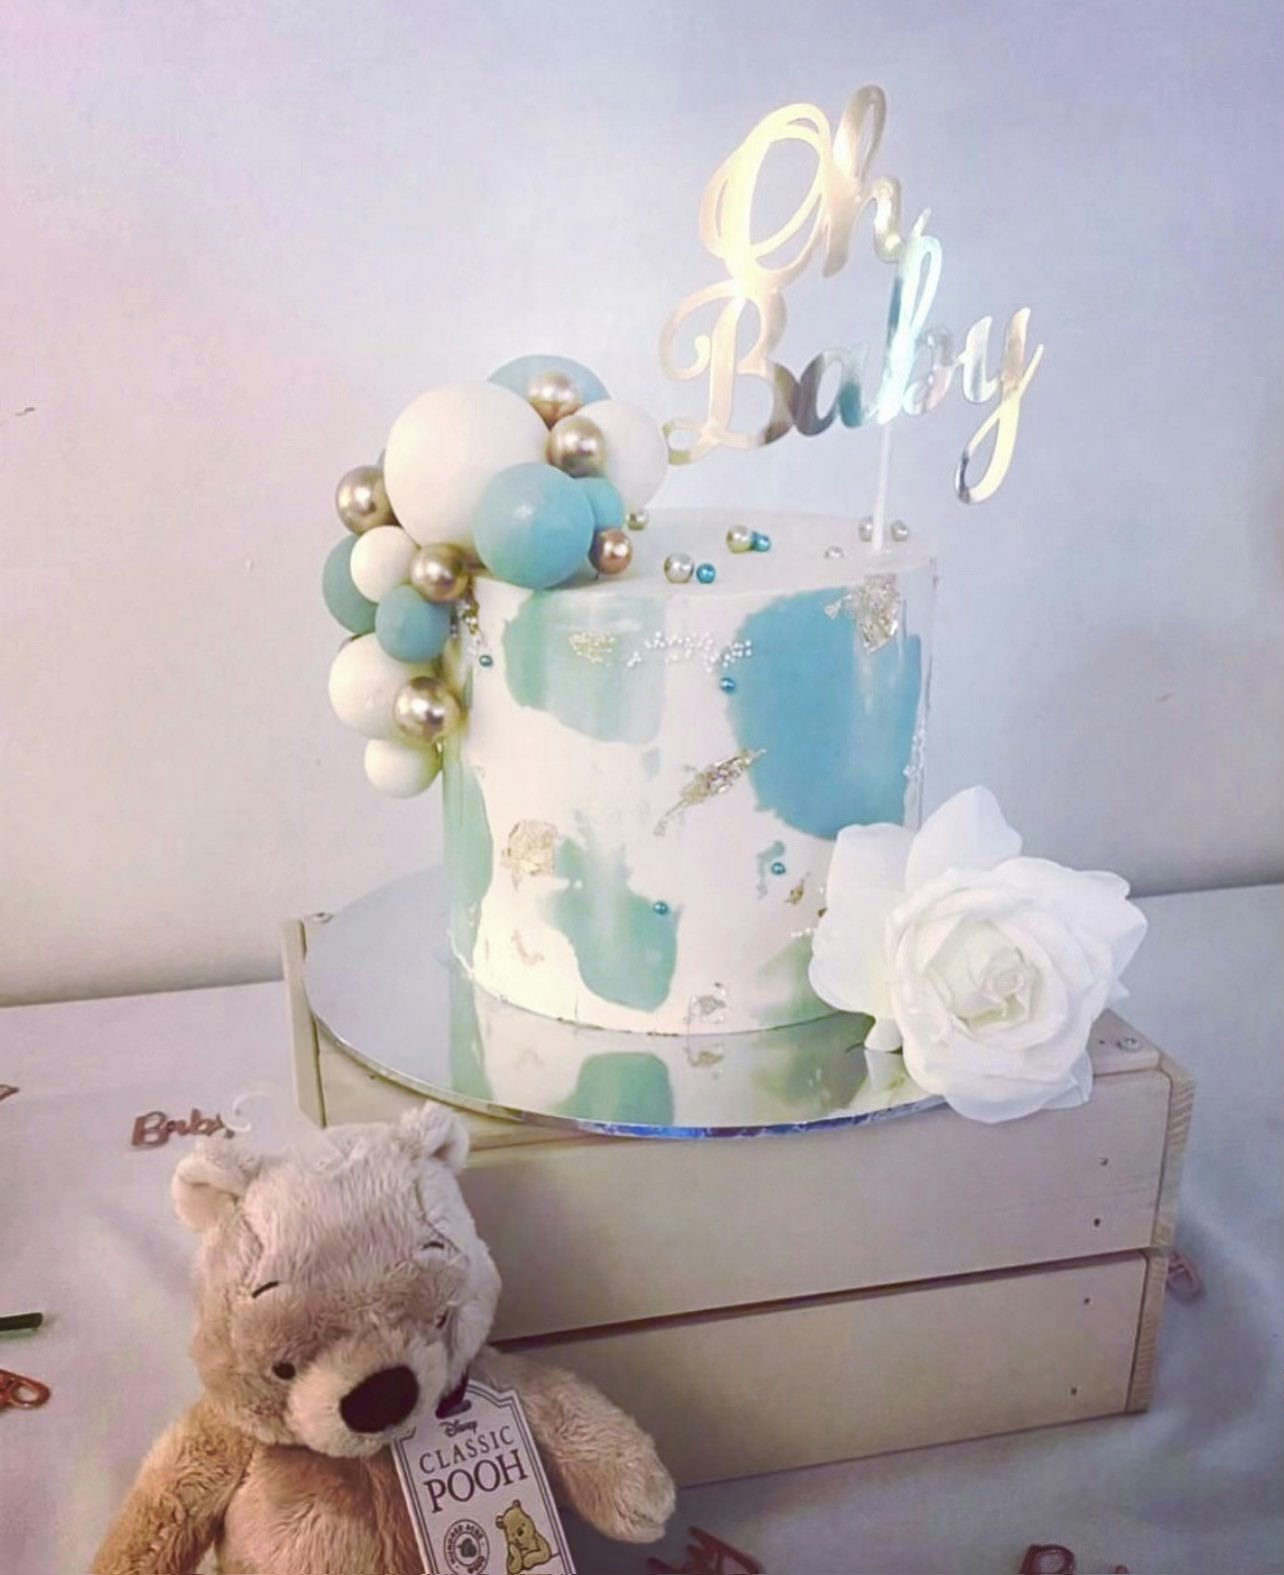 Blue and white watercolour-styled cake with a teddy bear next to it